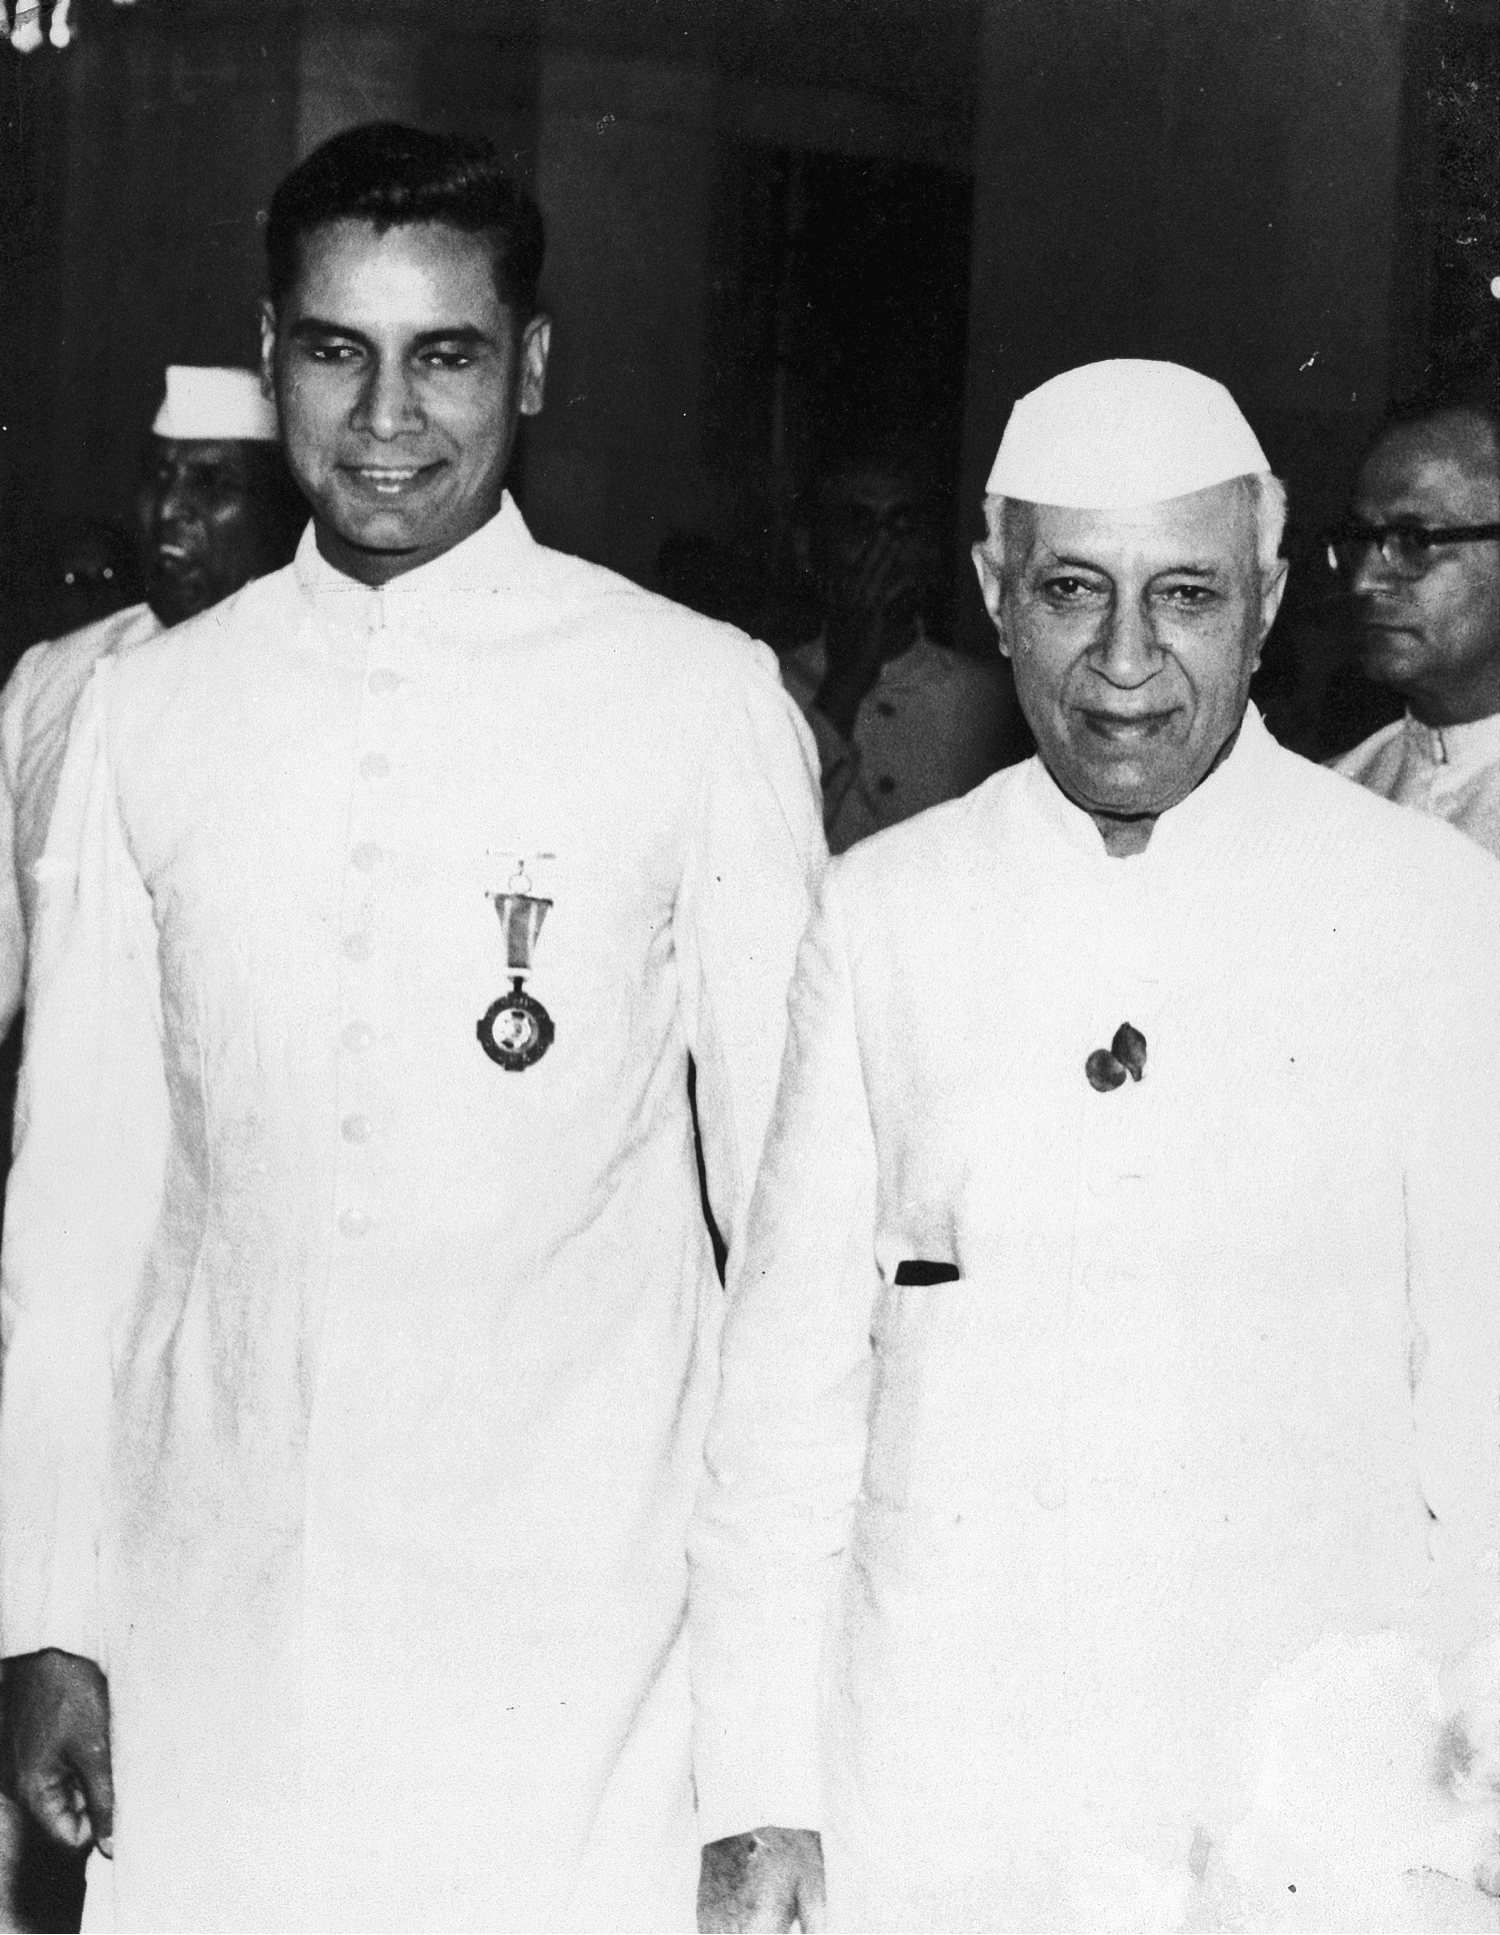 KC and Nehru at the Padma award ceremony, c. 1962�